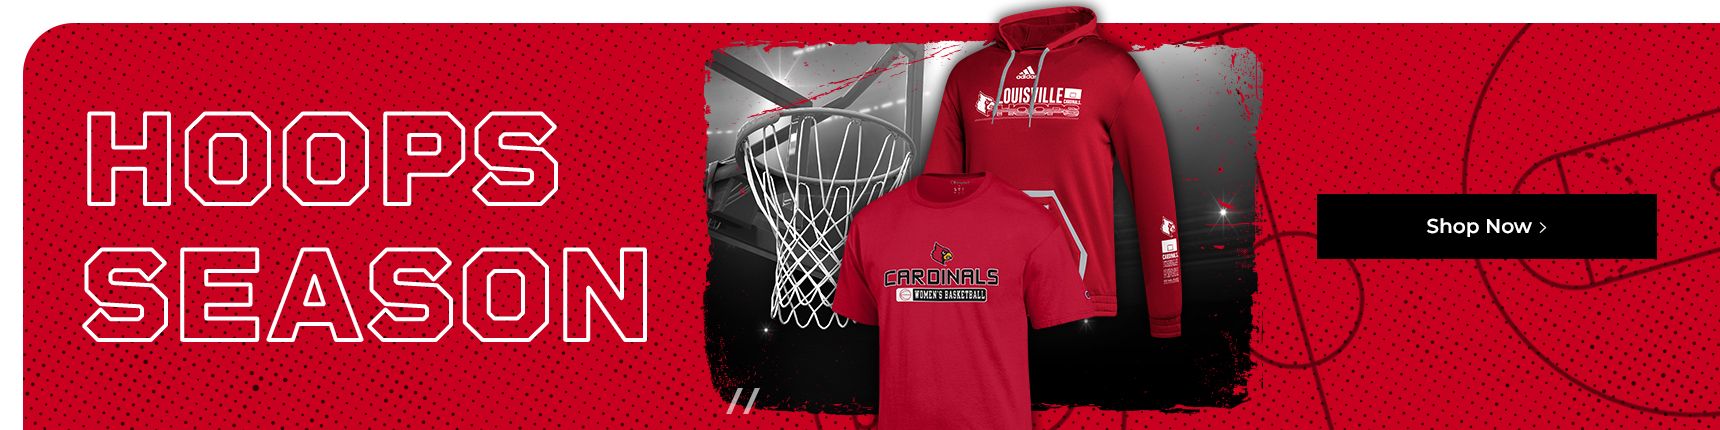 University of Louisville Gifts, Apparel and Clothing, University of  Louisville Jerseys, Shirts, Merchandise